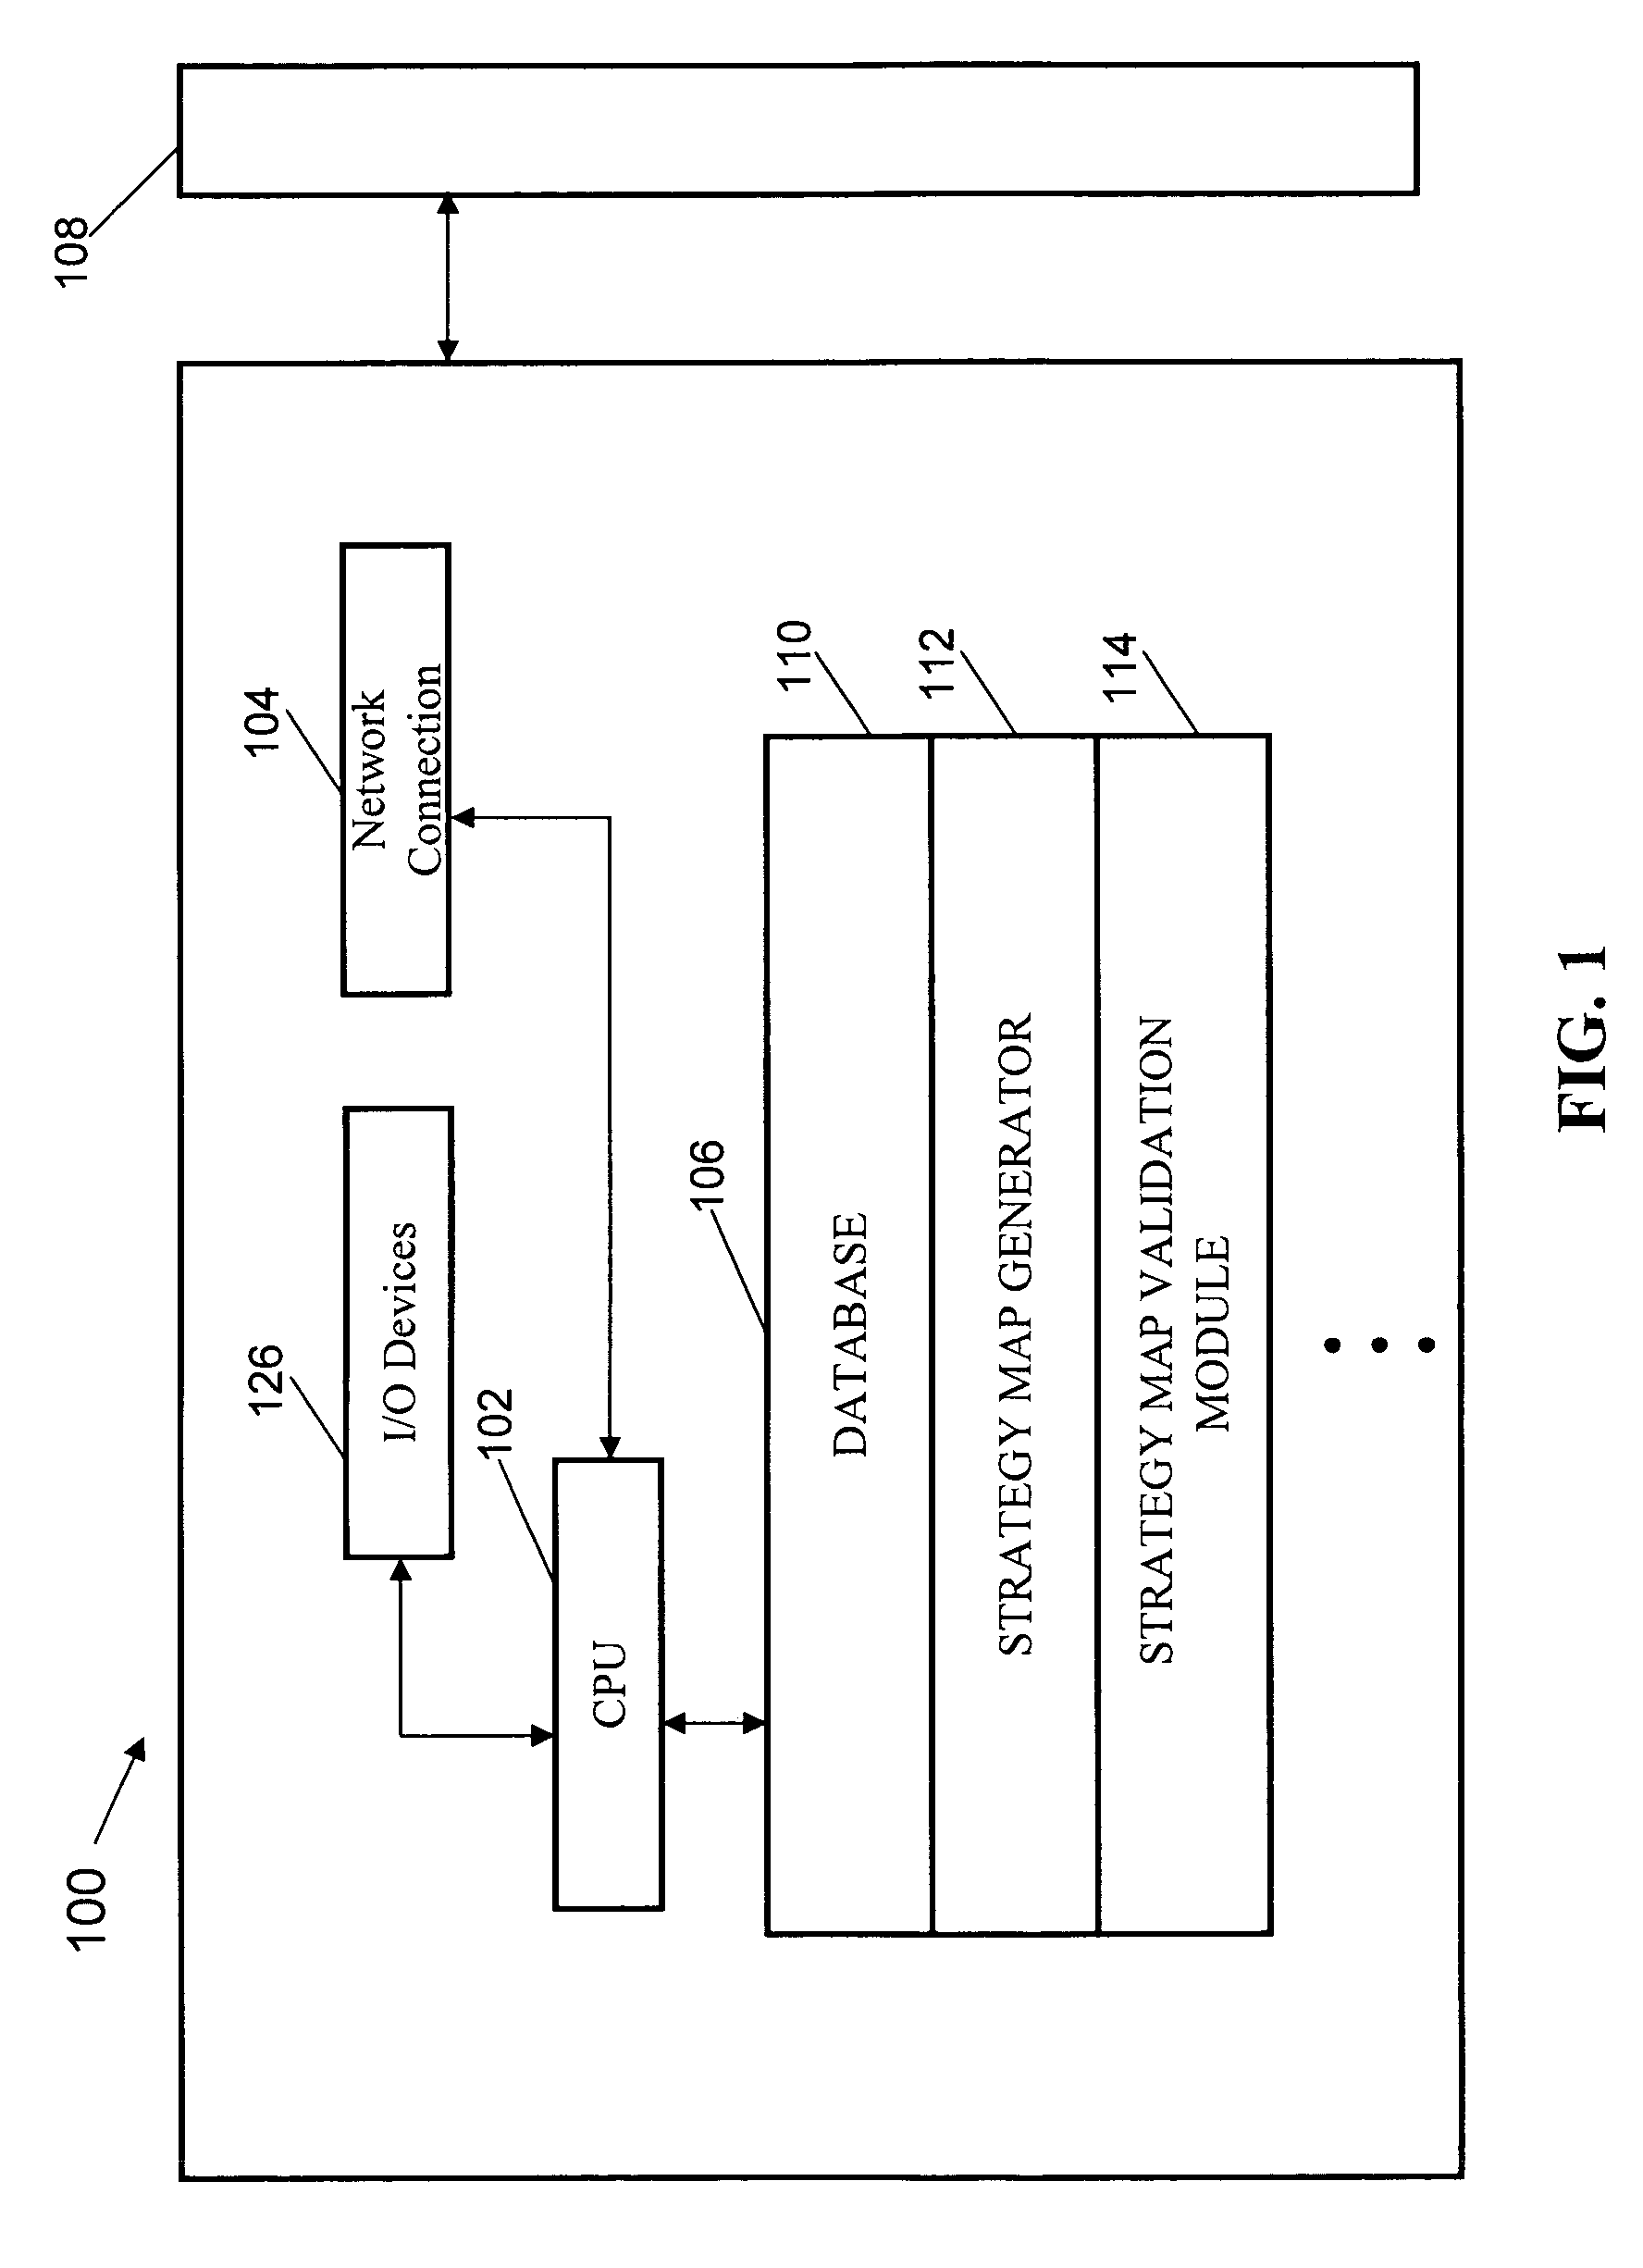 Apparatus and method for strategy map validation and visualization